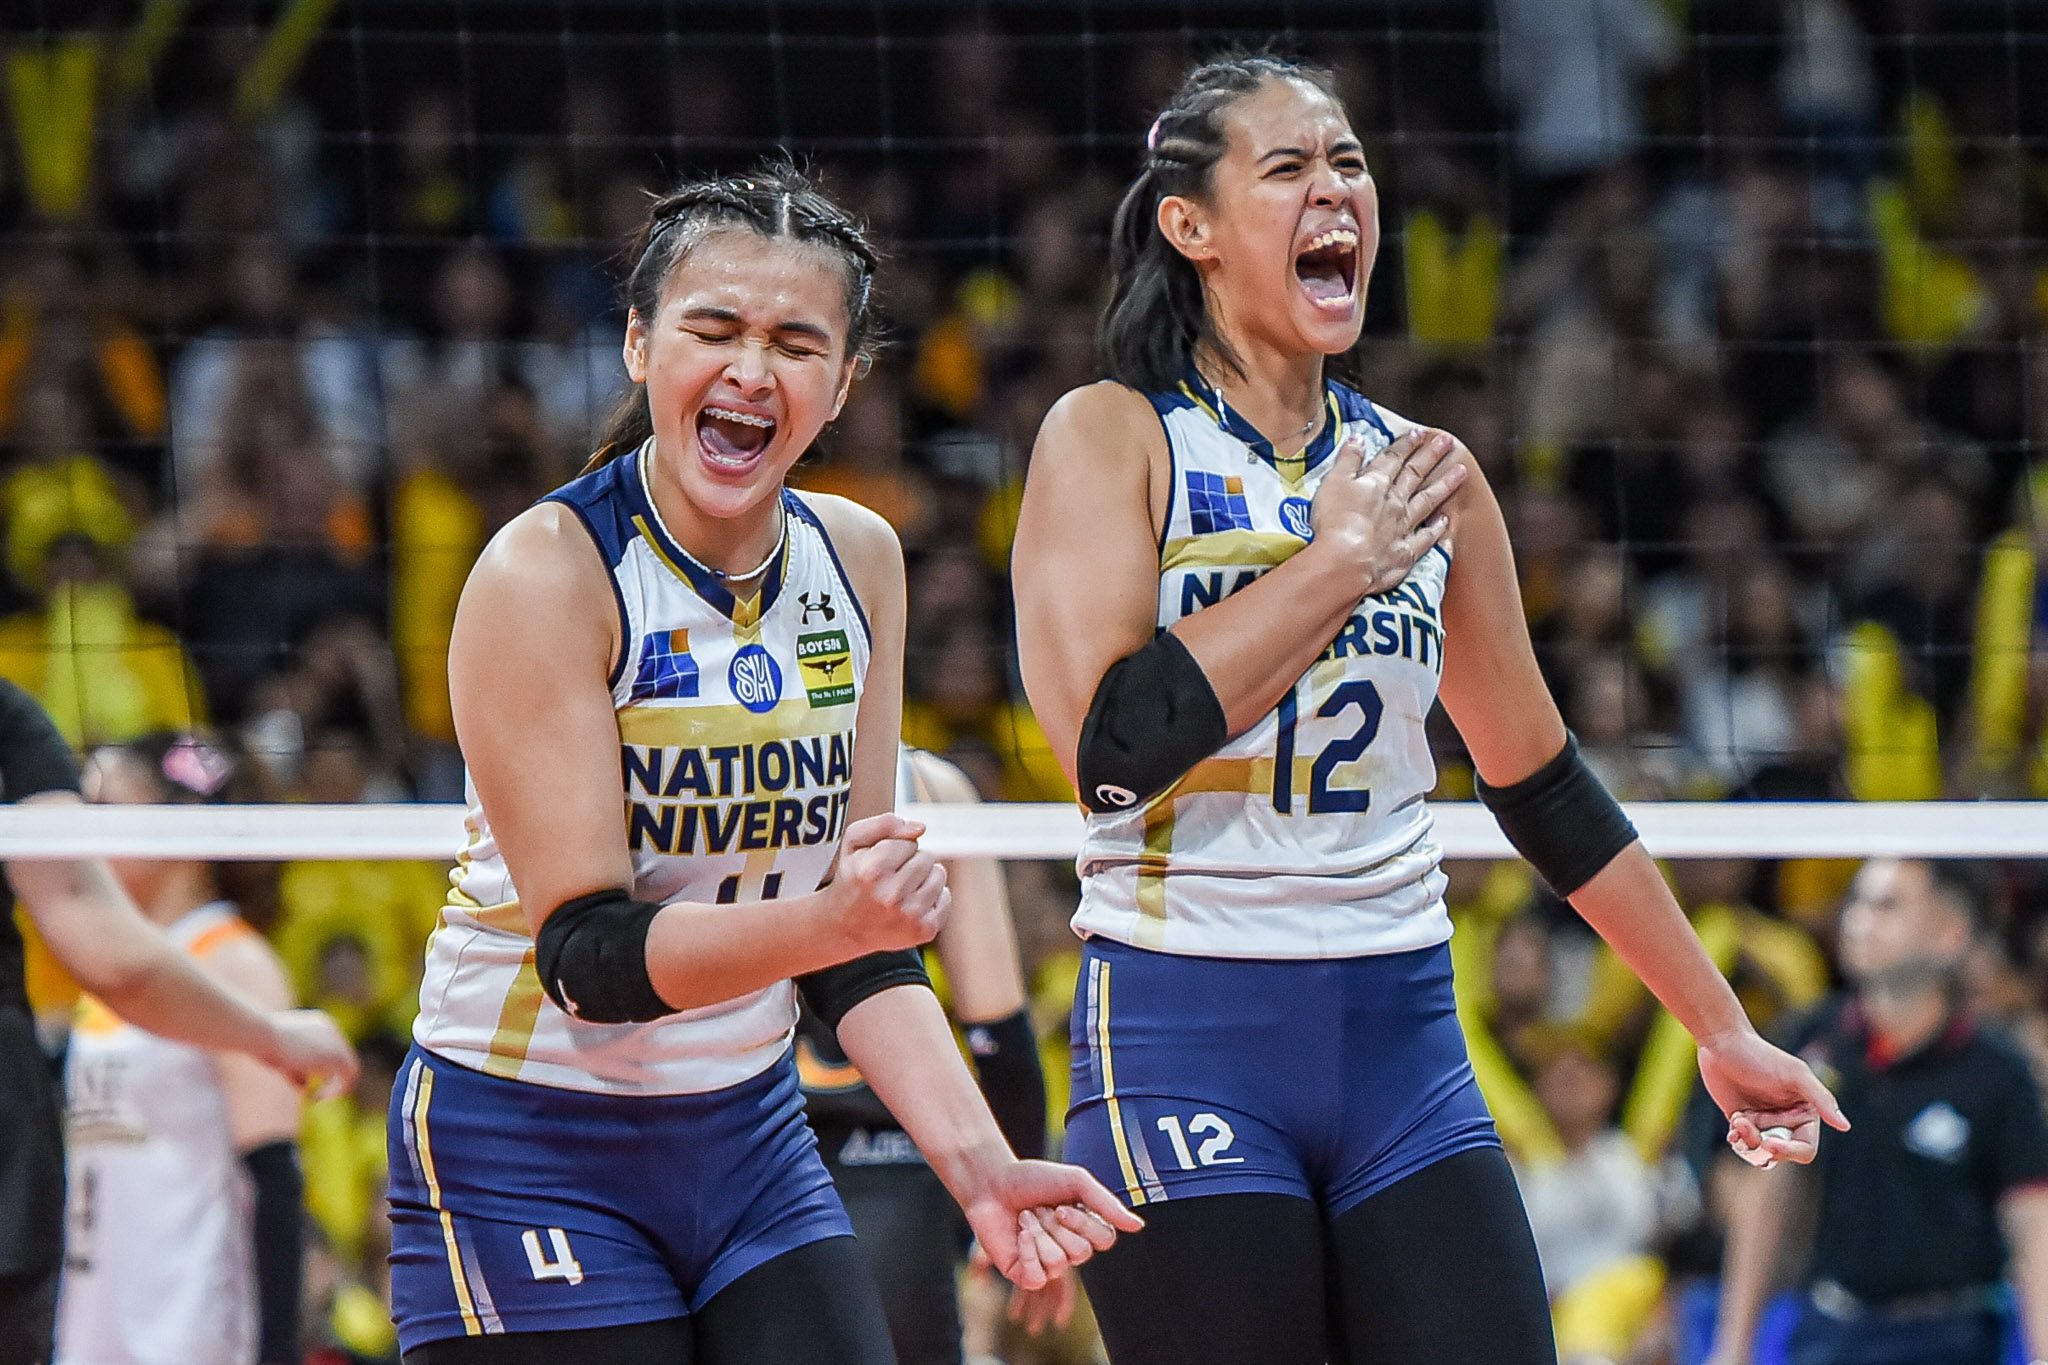 Queens again: NU sweeps UST, bags 4th UAAP women’s volleyball championship